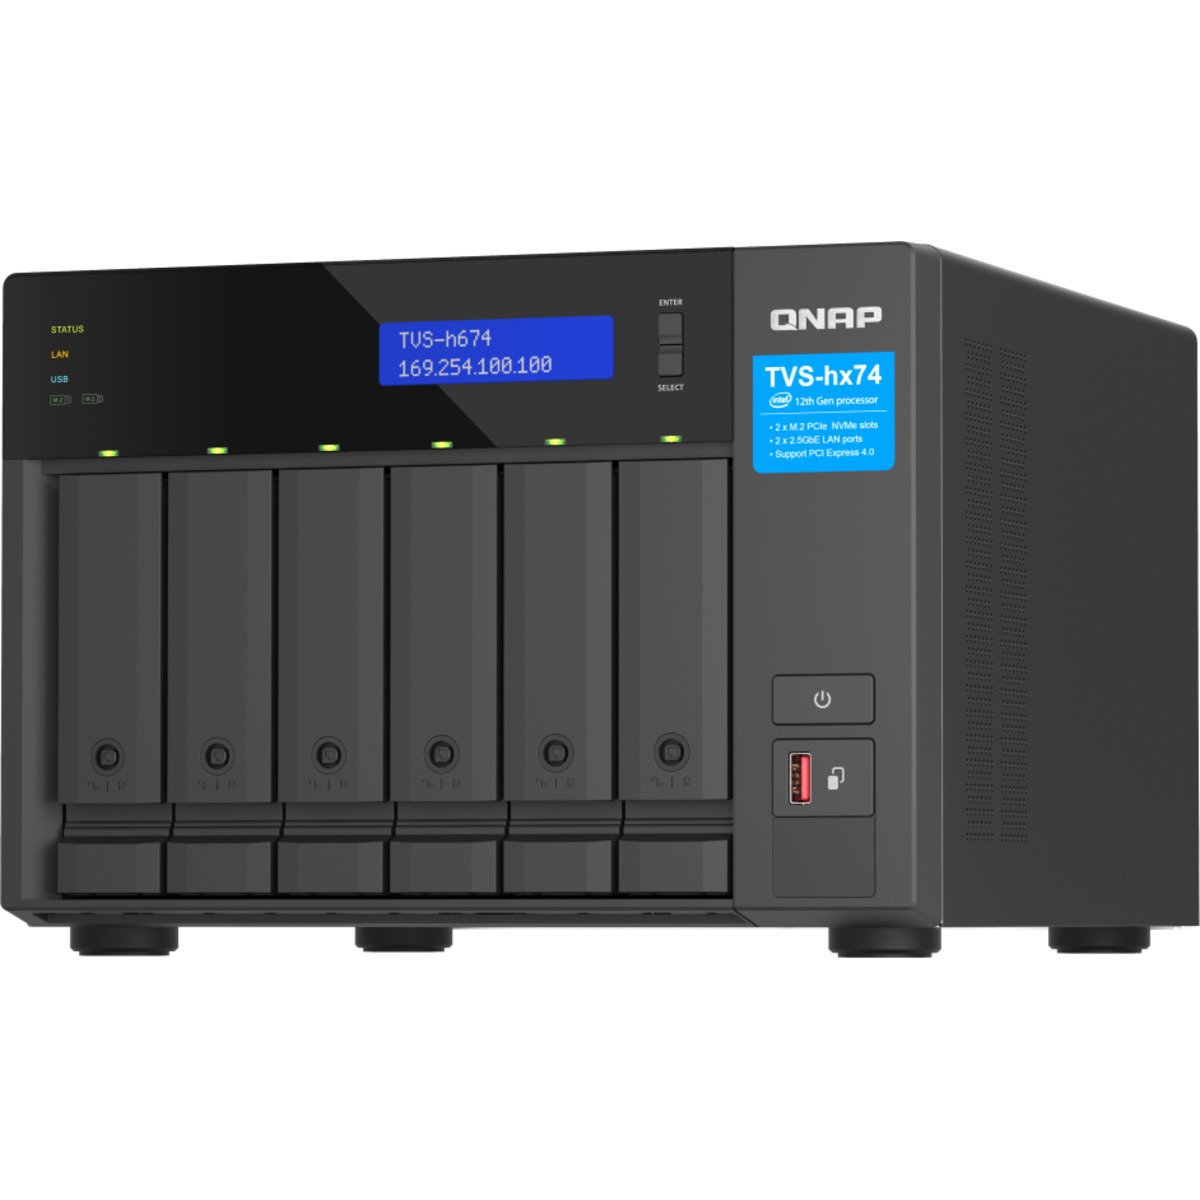 QNAP TVS-h674 Core i5 48tb 6-Bay Desktop Multimedia / Power User / Business NAS - Network Attached Storage Device 4x12tb Western Digital Ultrastar DC HC520 HUH721212ALE600 3.5 7200rpm SATA 6Gb/s HDD ENTERPRISE Class Drives Installed - Burn-In Tested TVS-h674 Core i5